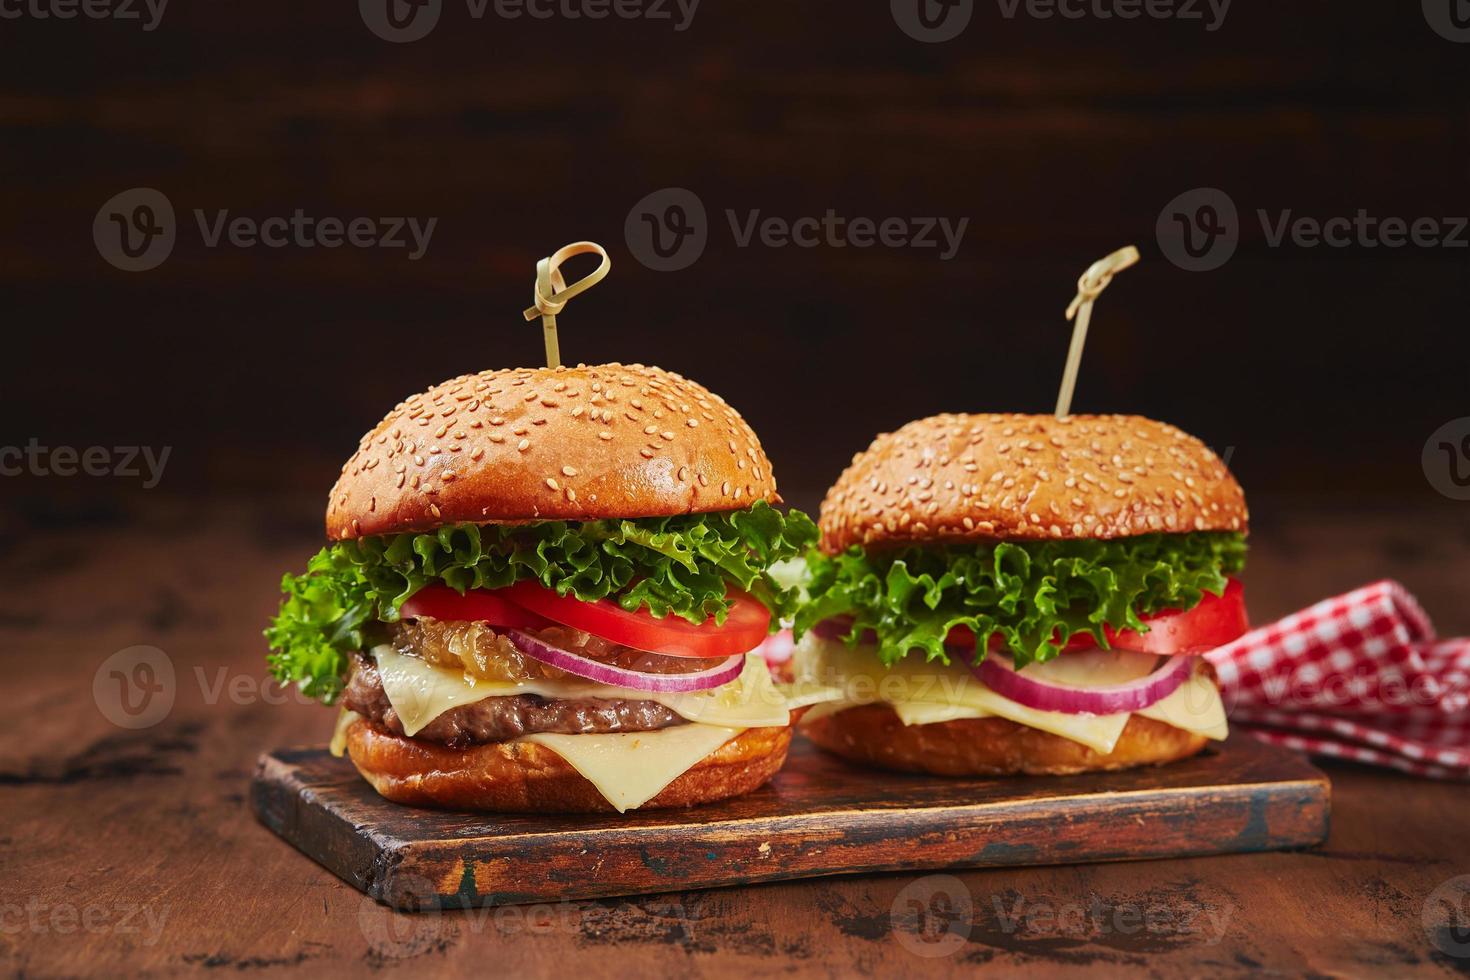 Two homemade burgers with beef, cheese and onion marmalade on a wooden board. Fast food concept, american food photo